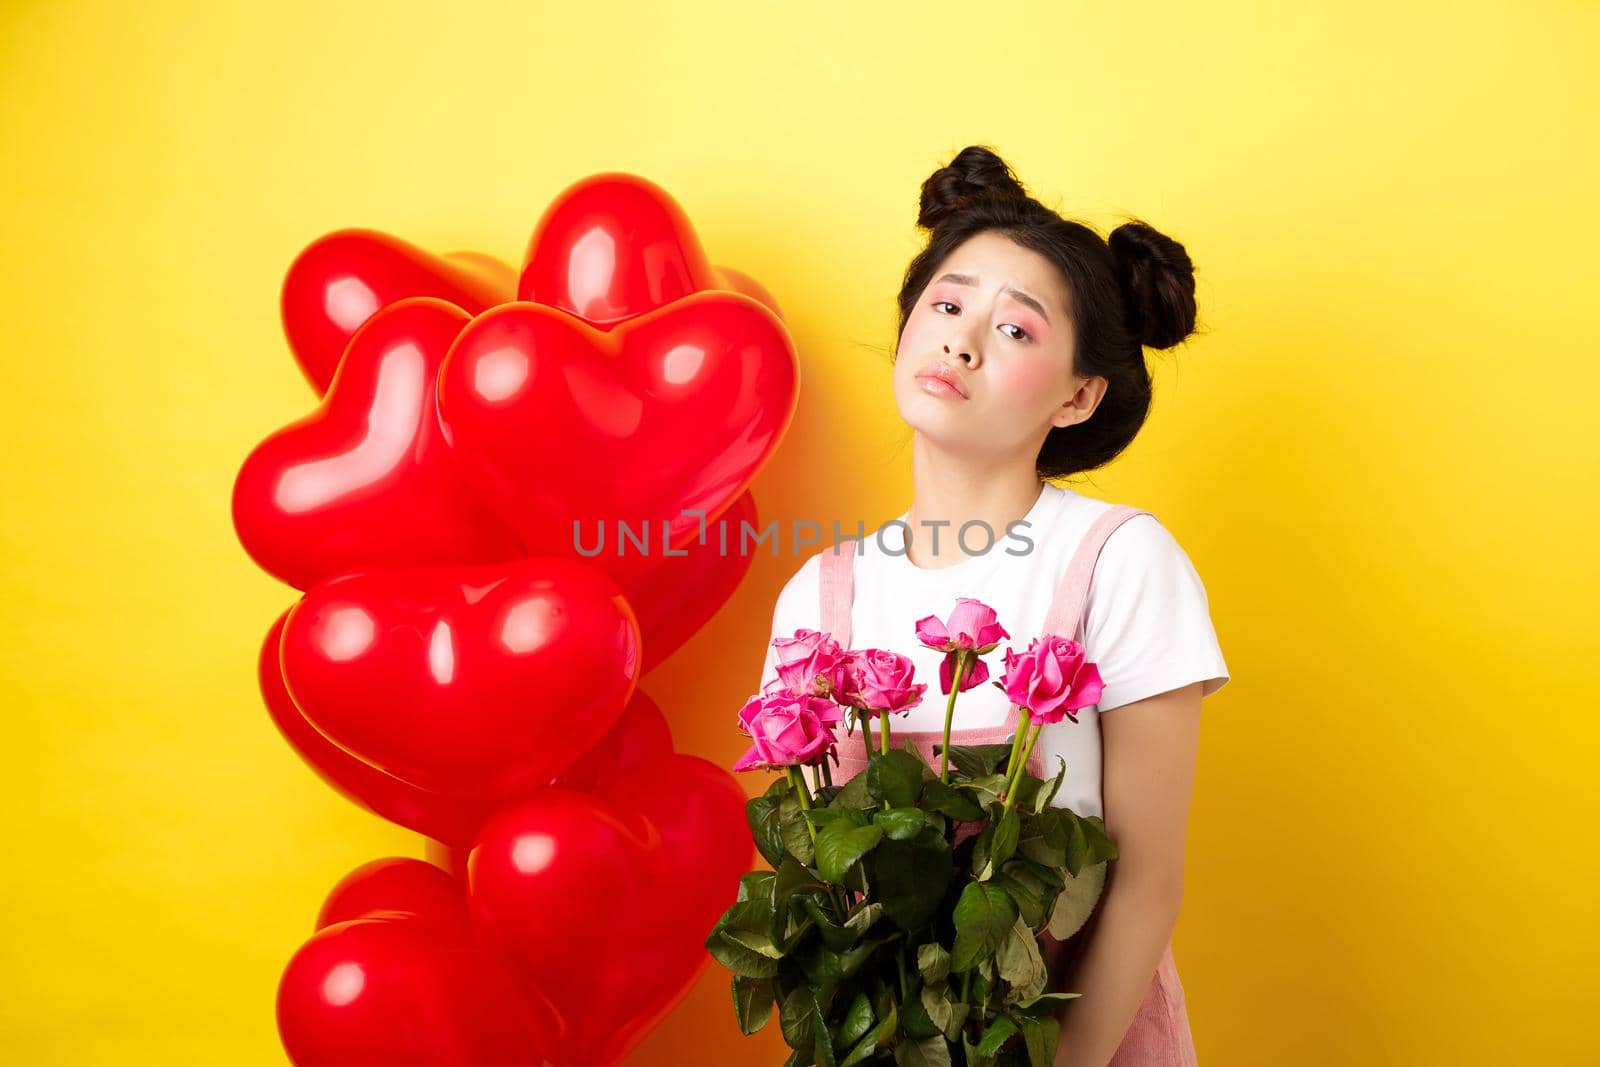 Happy Valentines concept. Sad and gloomy asian woman holding bouquet of roses and feeling upset and lonely on romantic lovers day, standing near red heart balloons, yellow background.